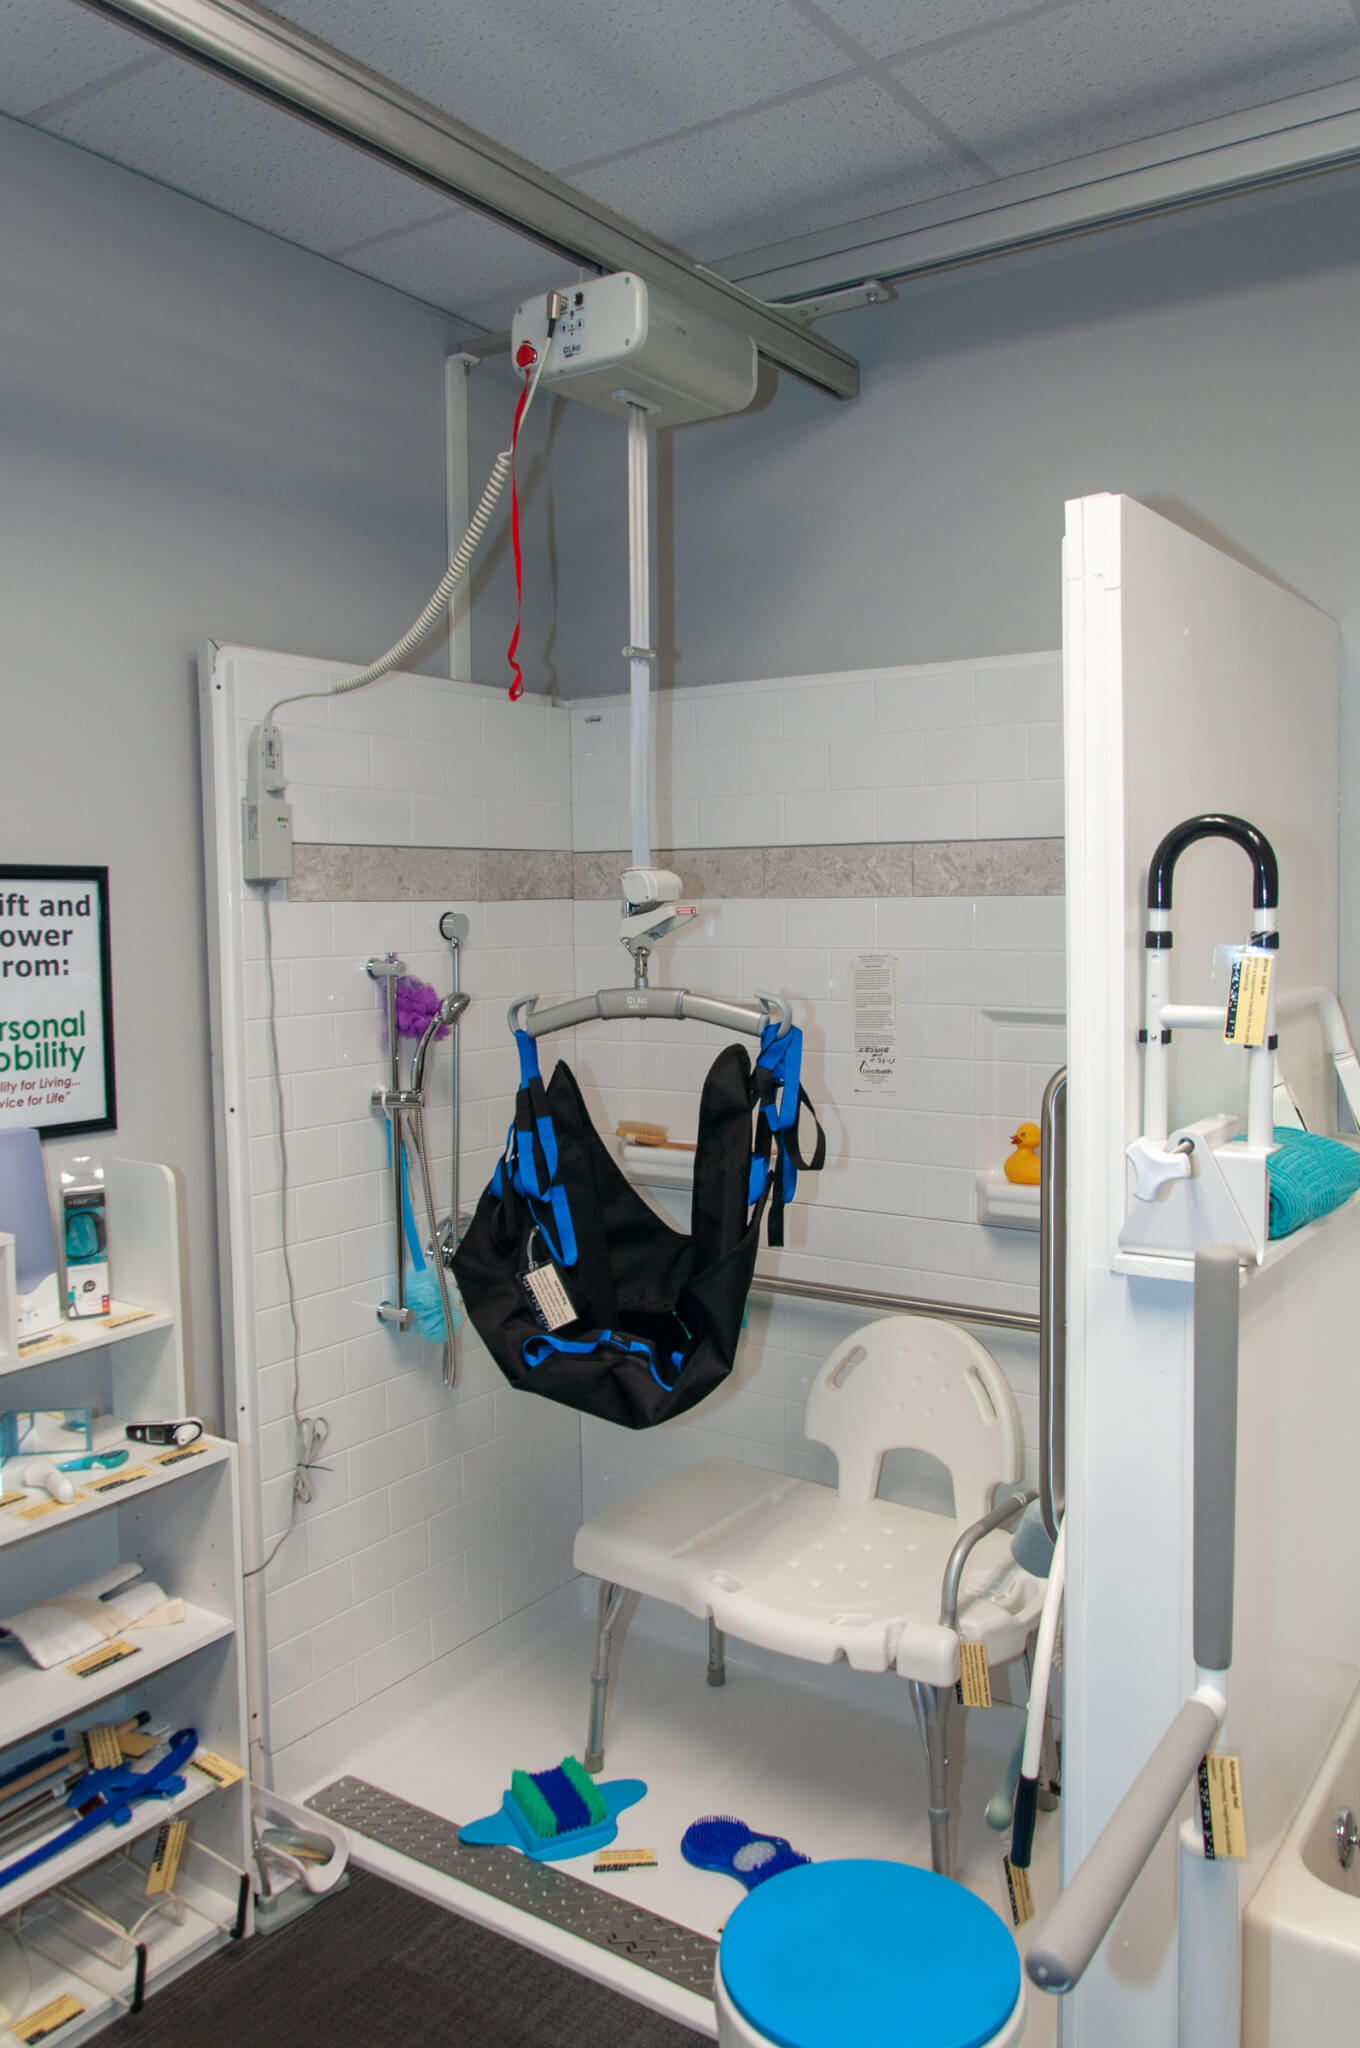 IATP Demonstration bathroom with overhead lift and roll in shower